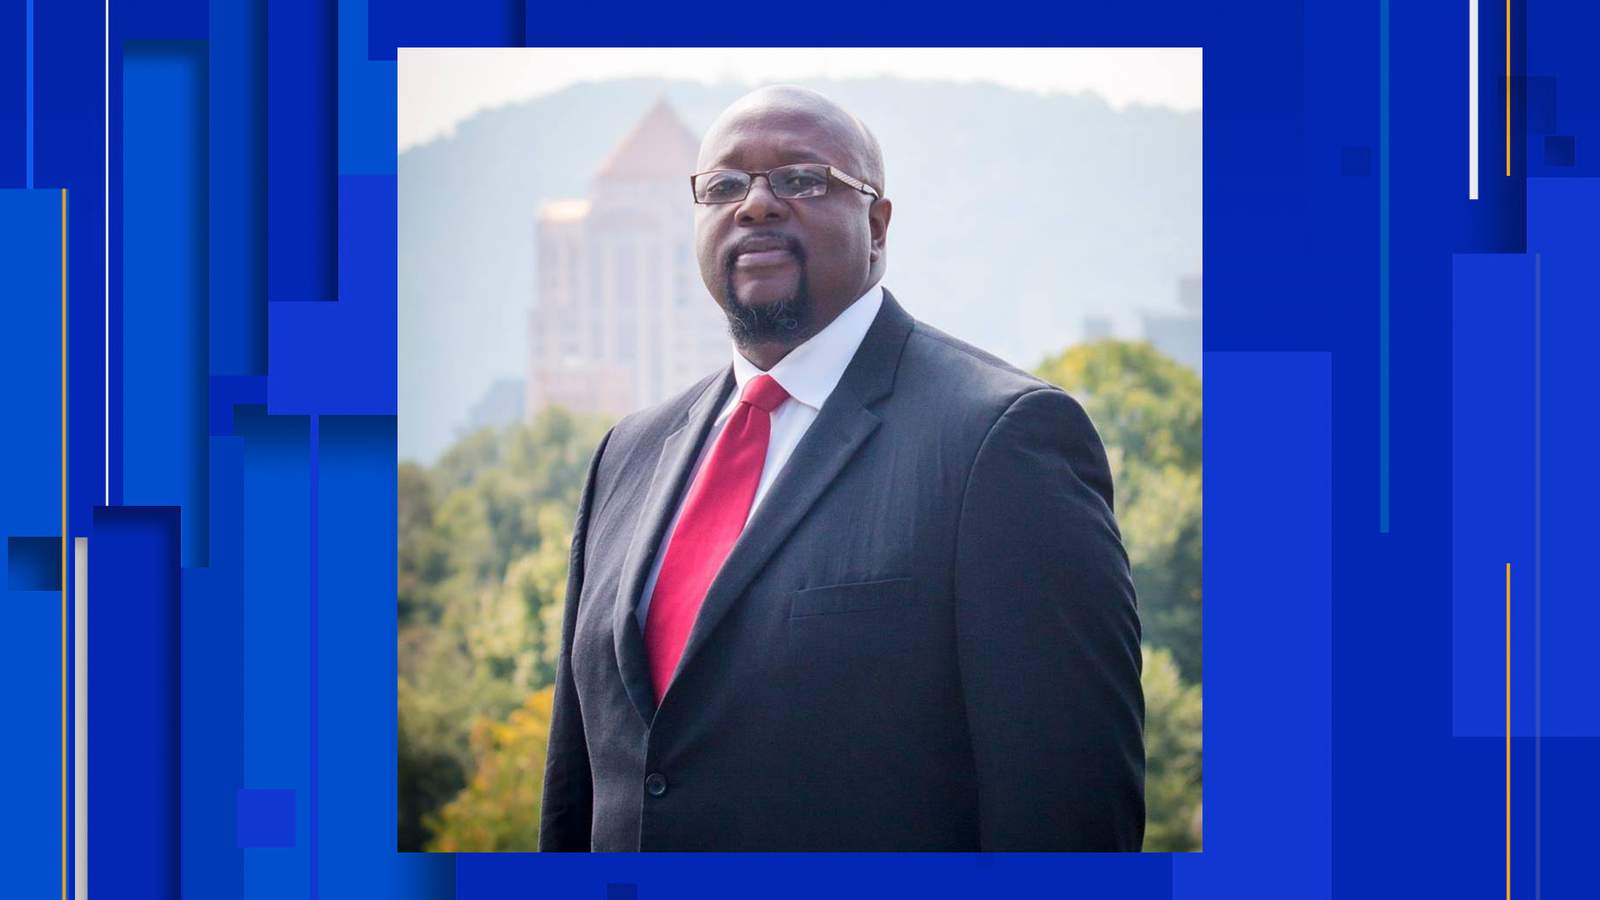 Roanoke City Council candidate tests positive for COVID-19